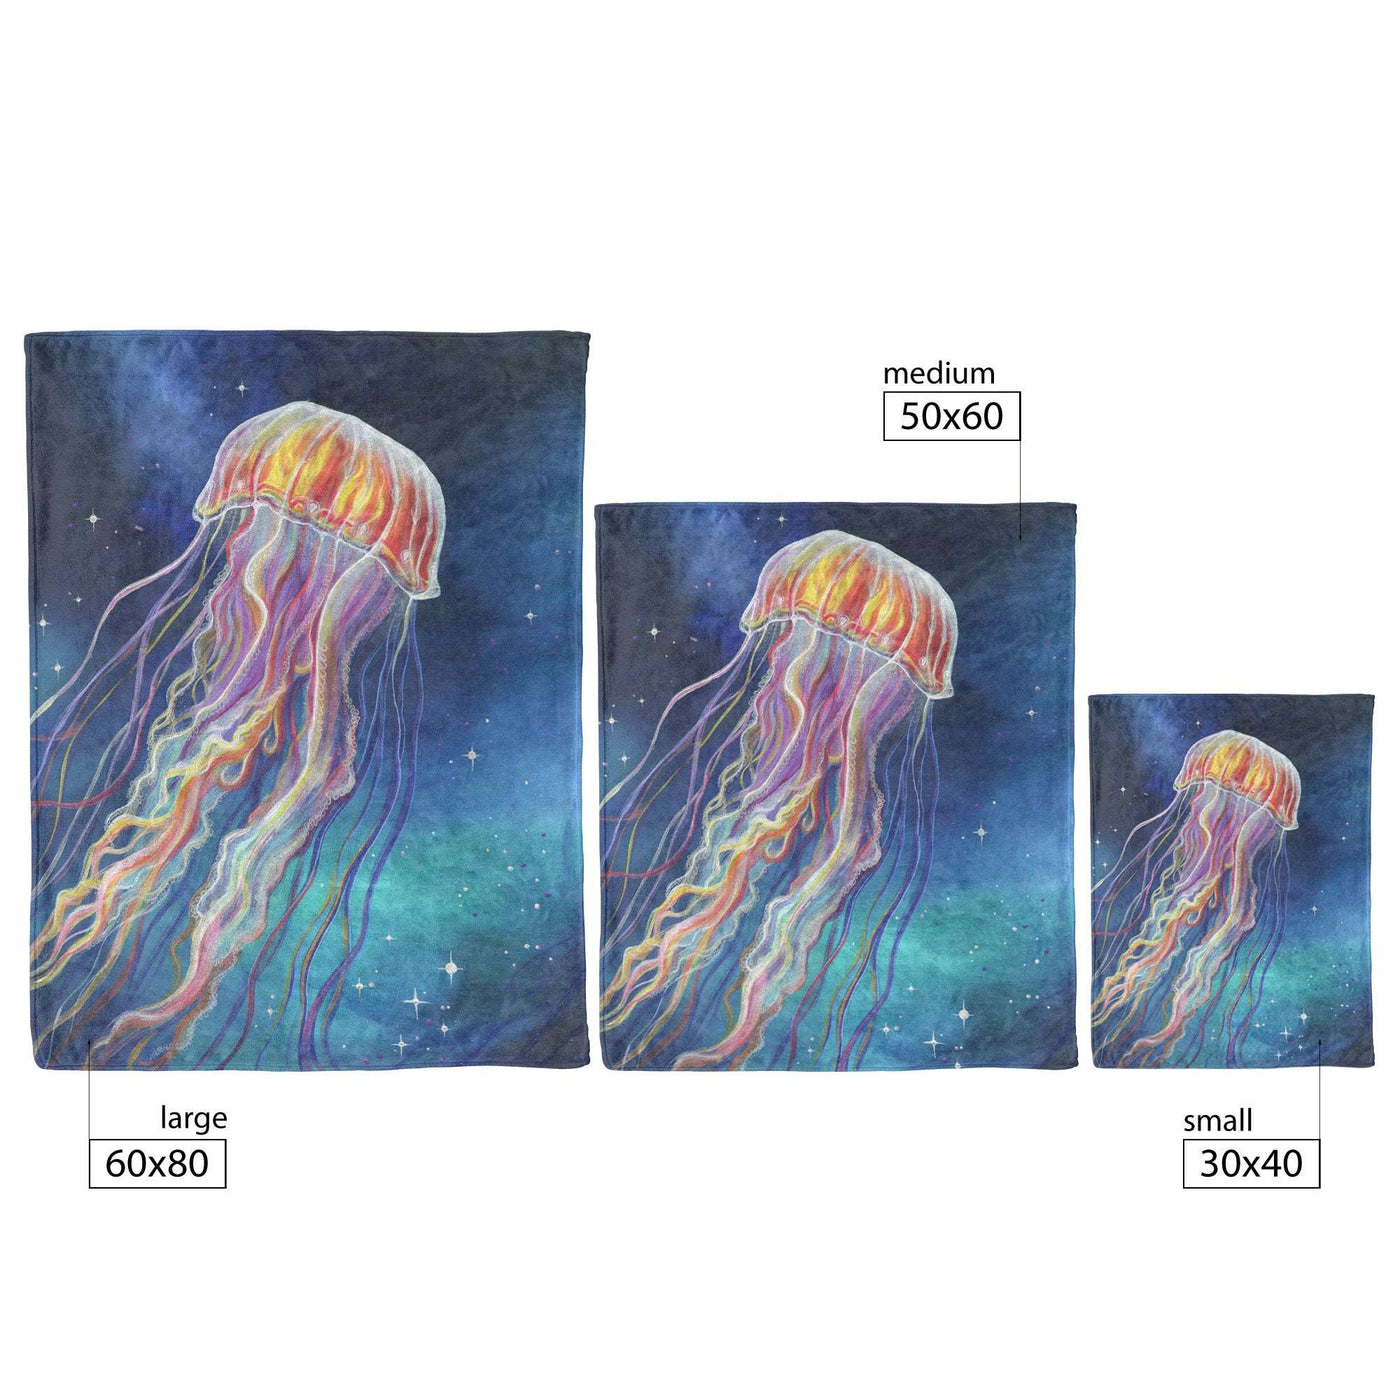 Three Jellyfish Blankets in different sizes: small, medium, and large, against a starry background.